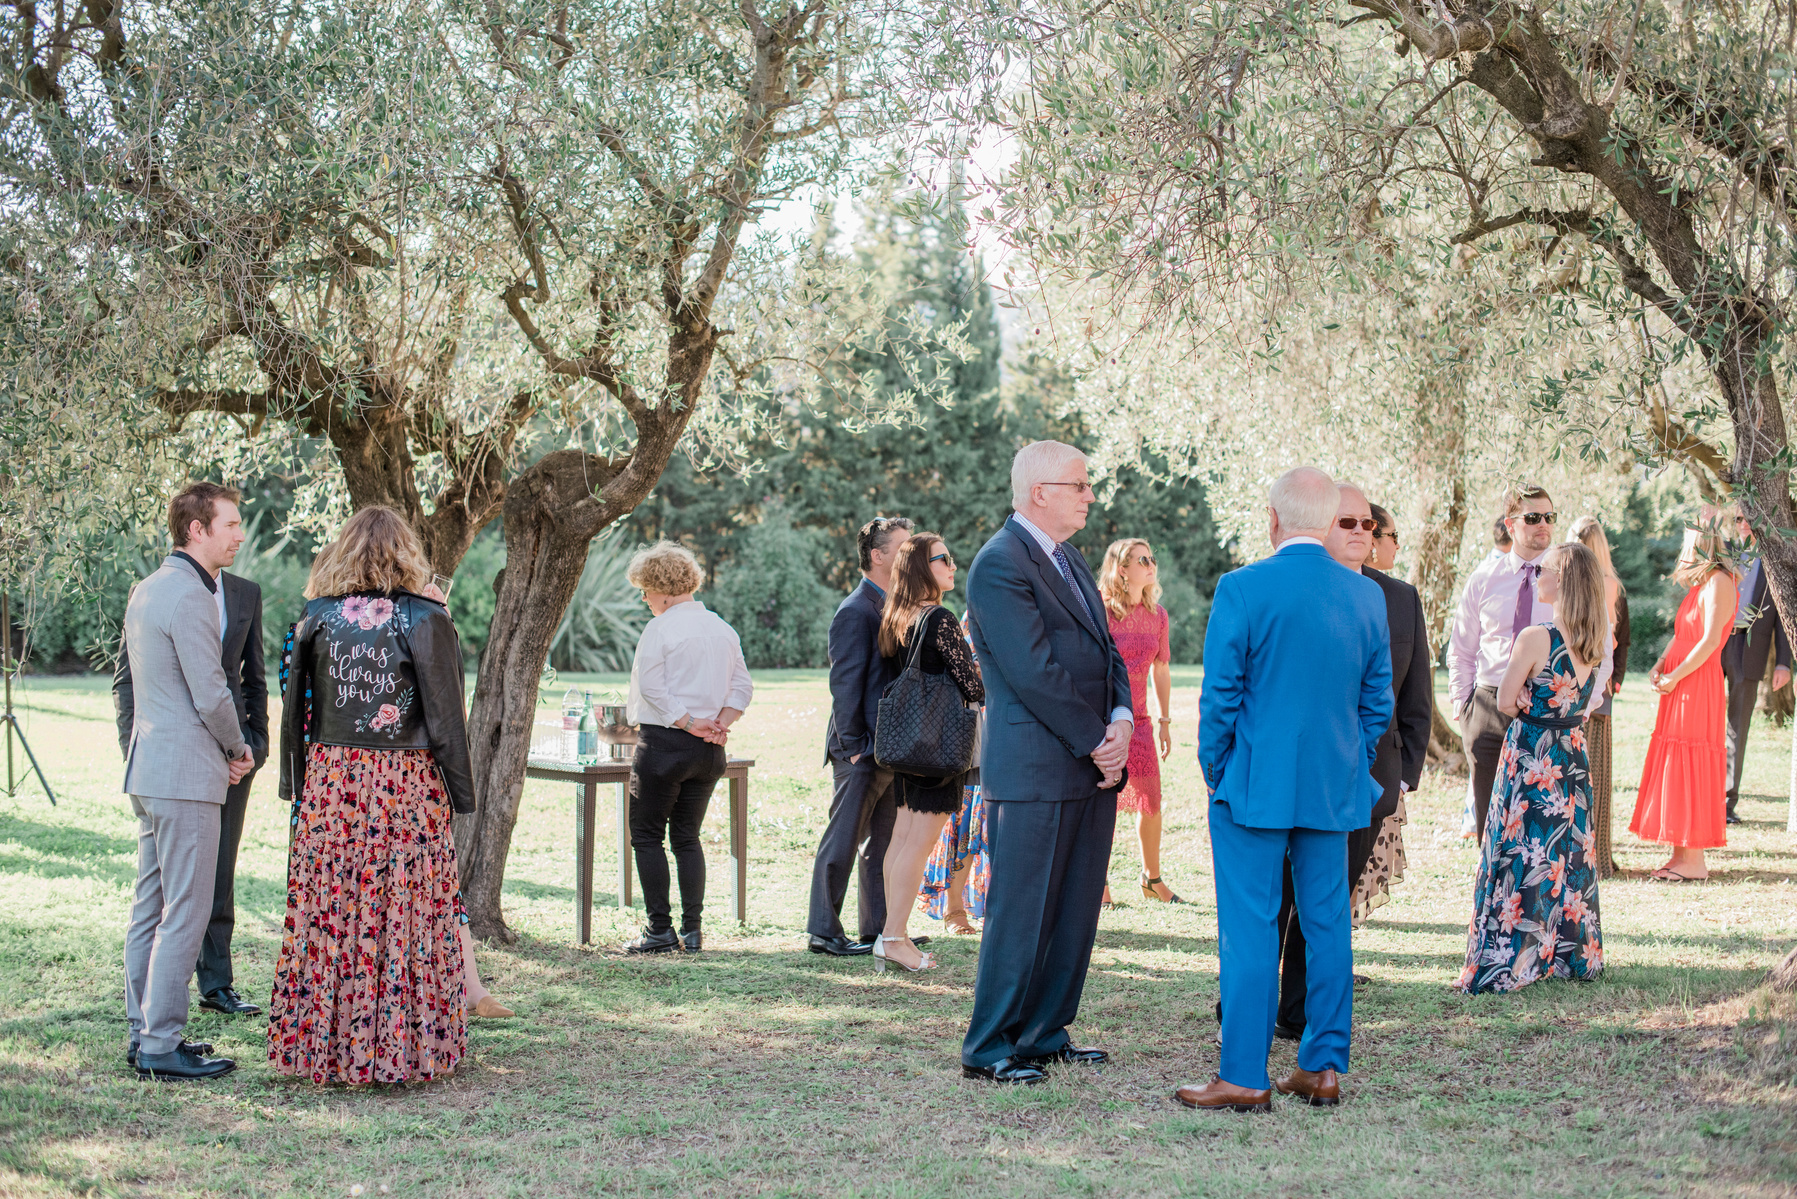 Cote d'Azur wedding at The Farm in Grasse, South of France. French Riviera English speaking wedding photographer. 